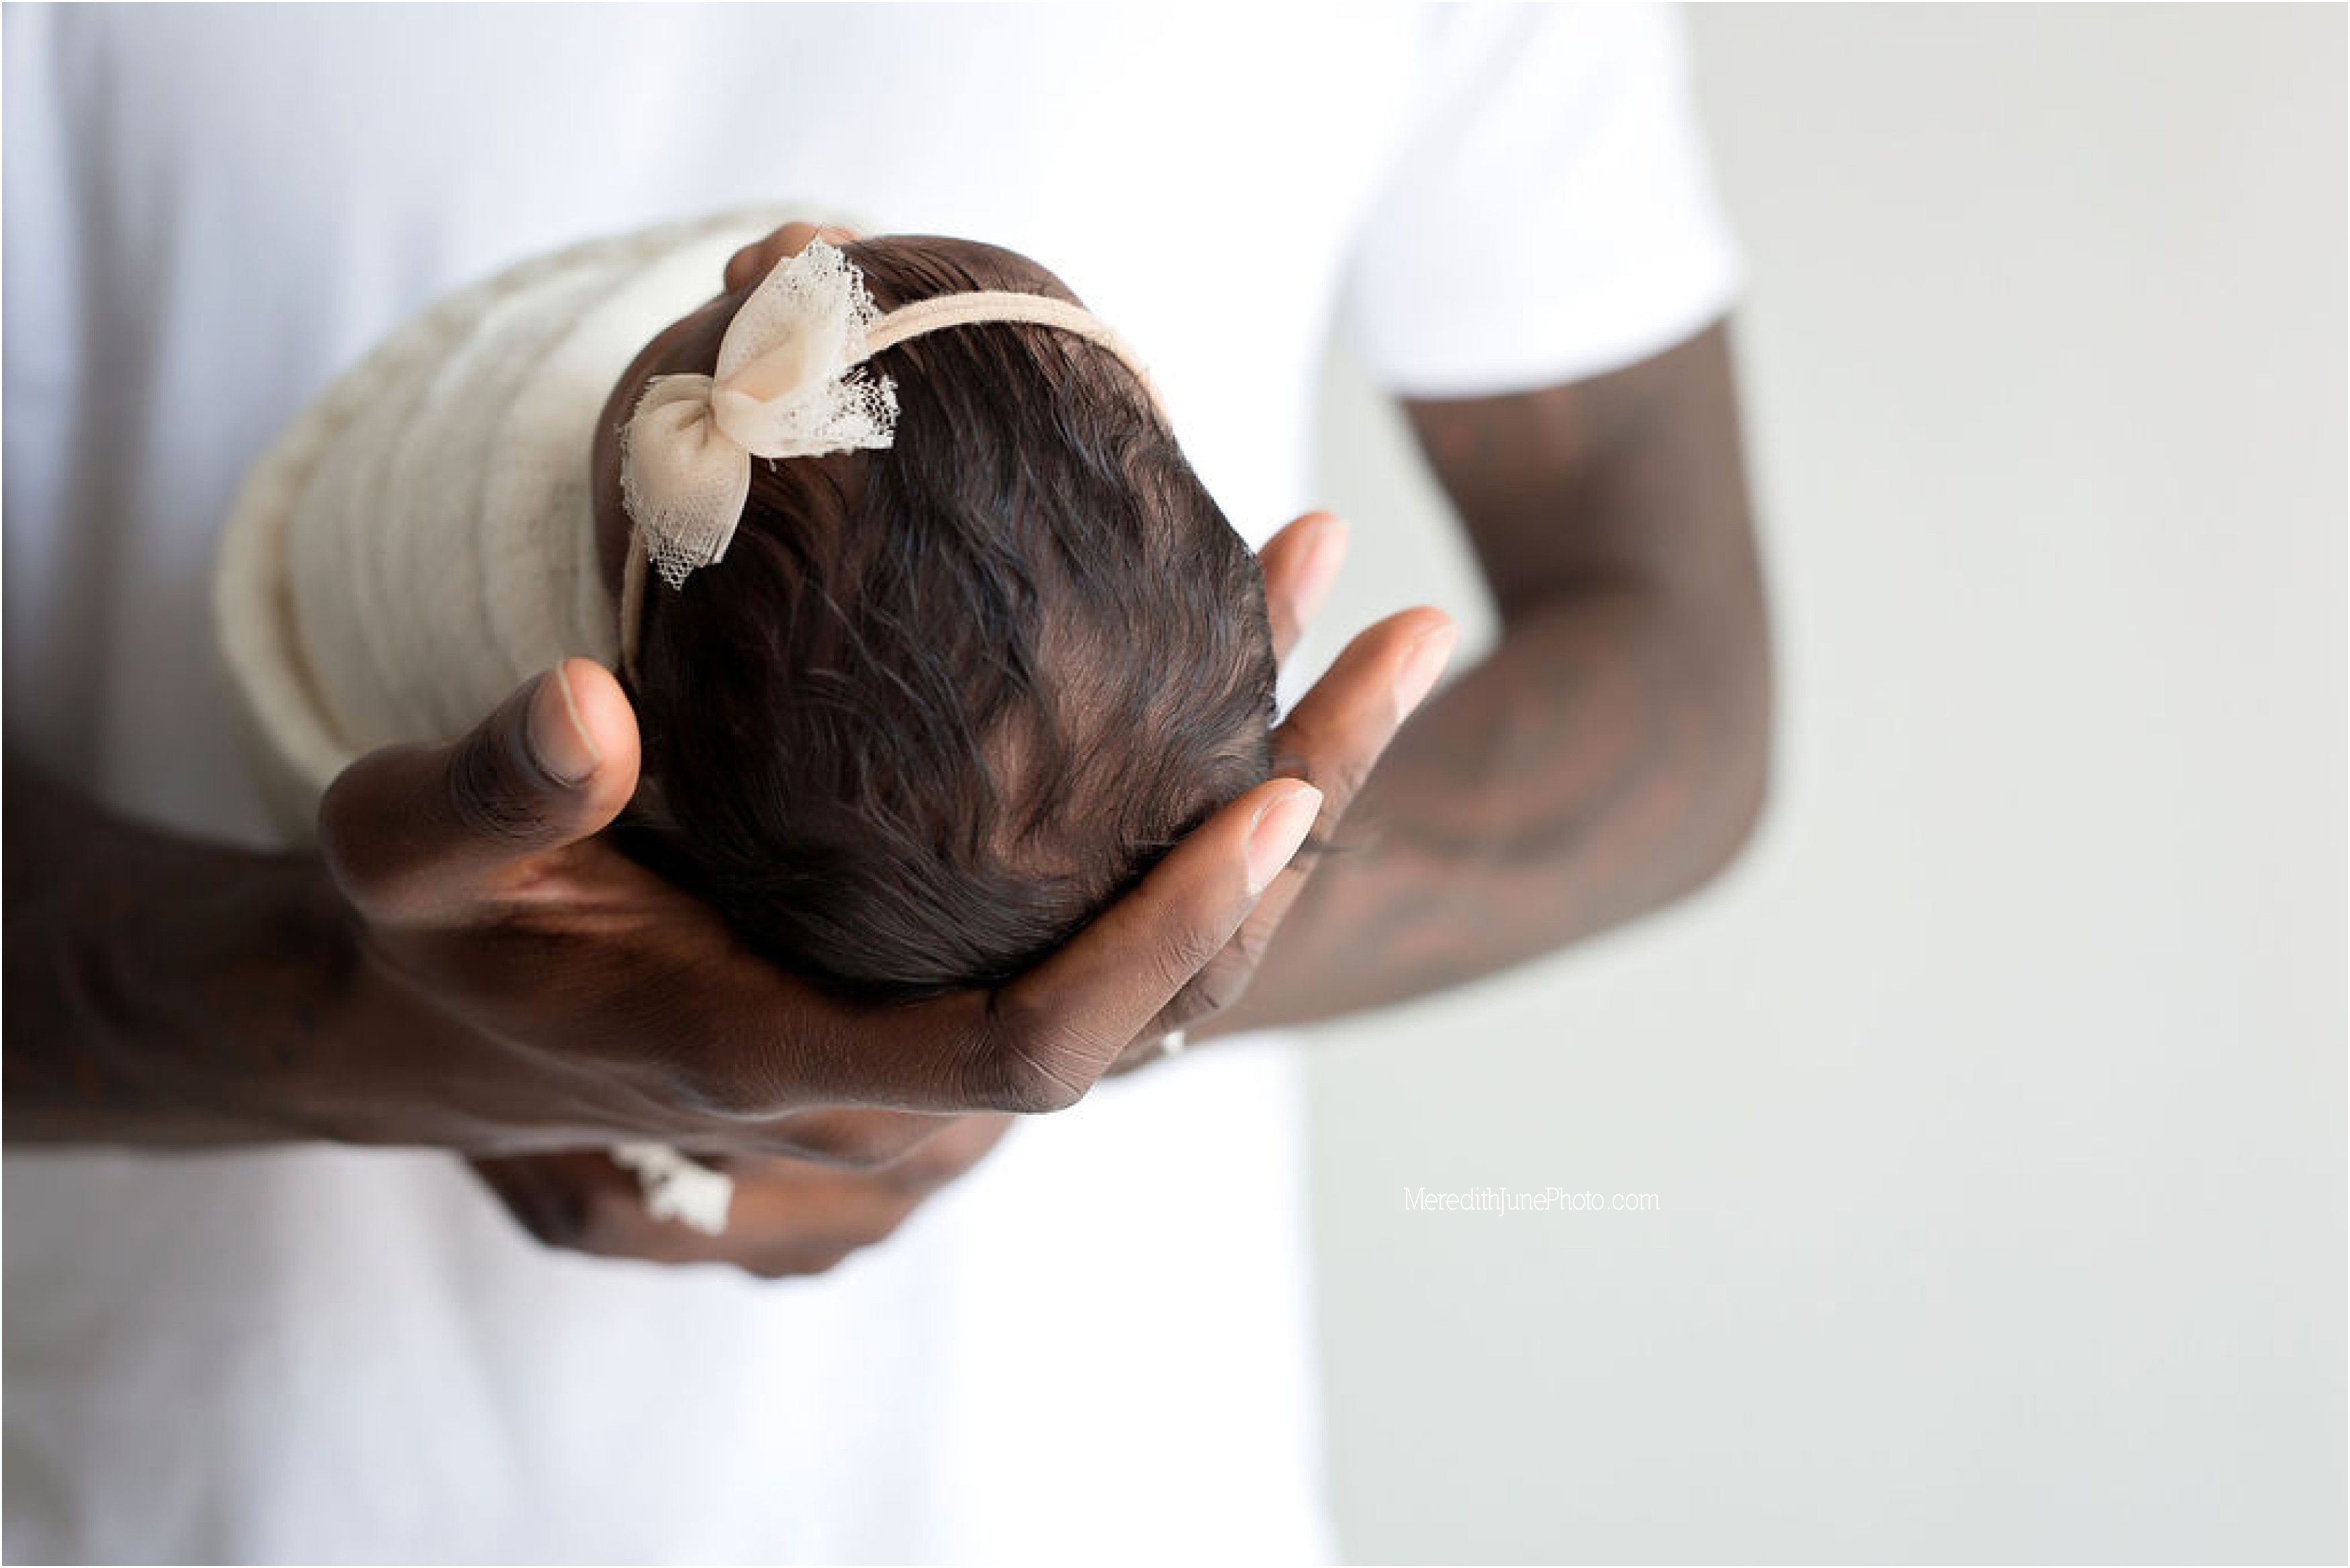 Newborn and family photo session at Meredith June Photography 